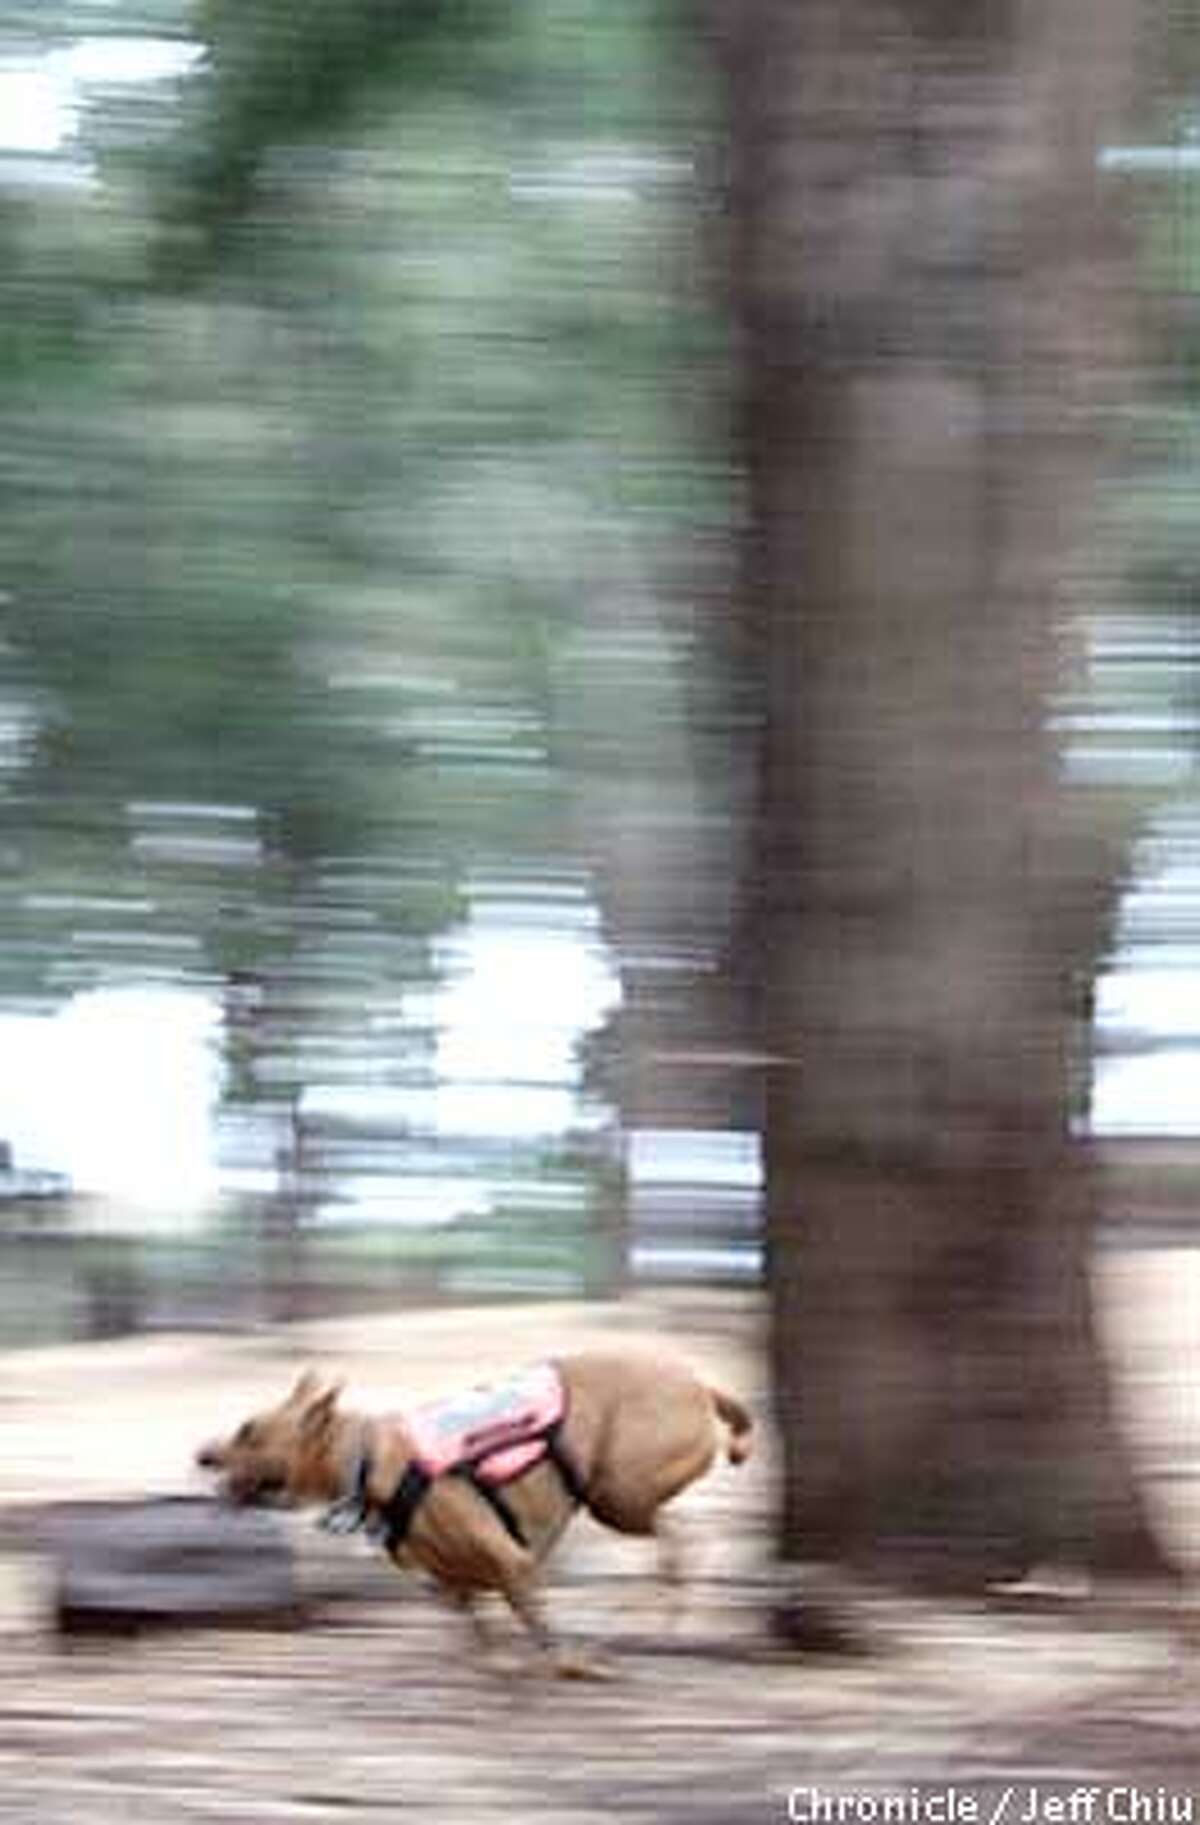 Four-year-old Dakota, a pit bull, ran a live search drill at Mills College in Oakland. Chronicle photo by Jeff Chiu